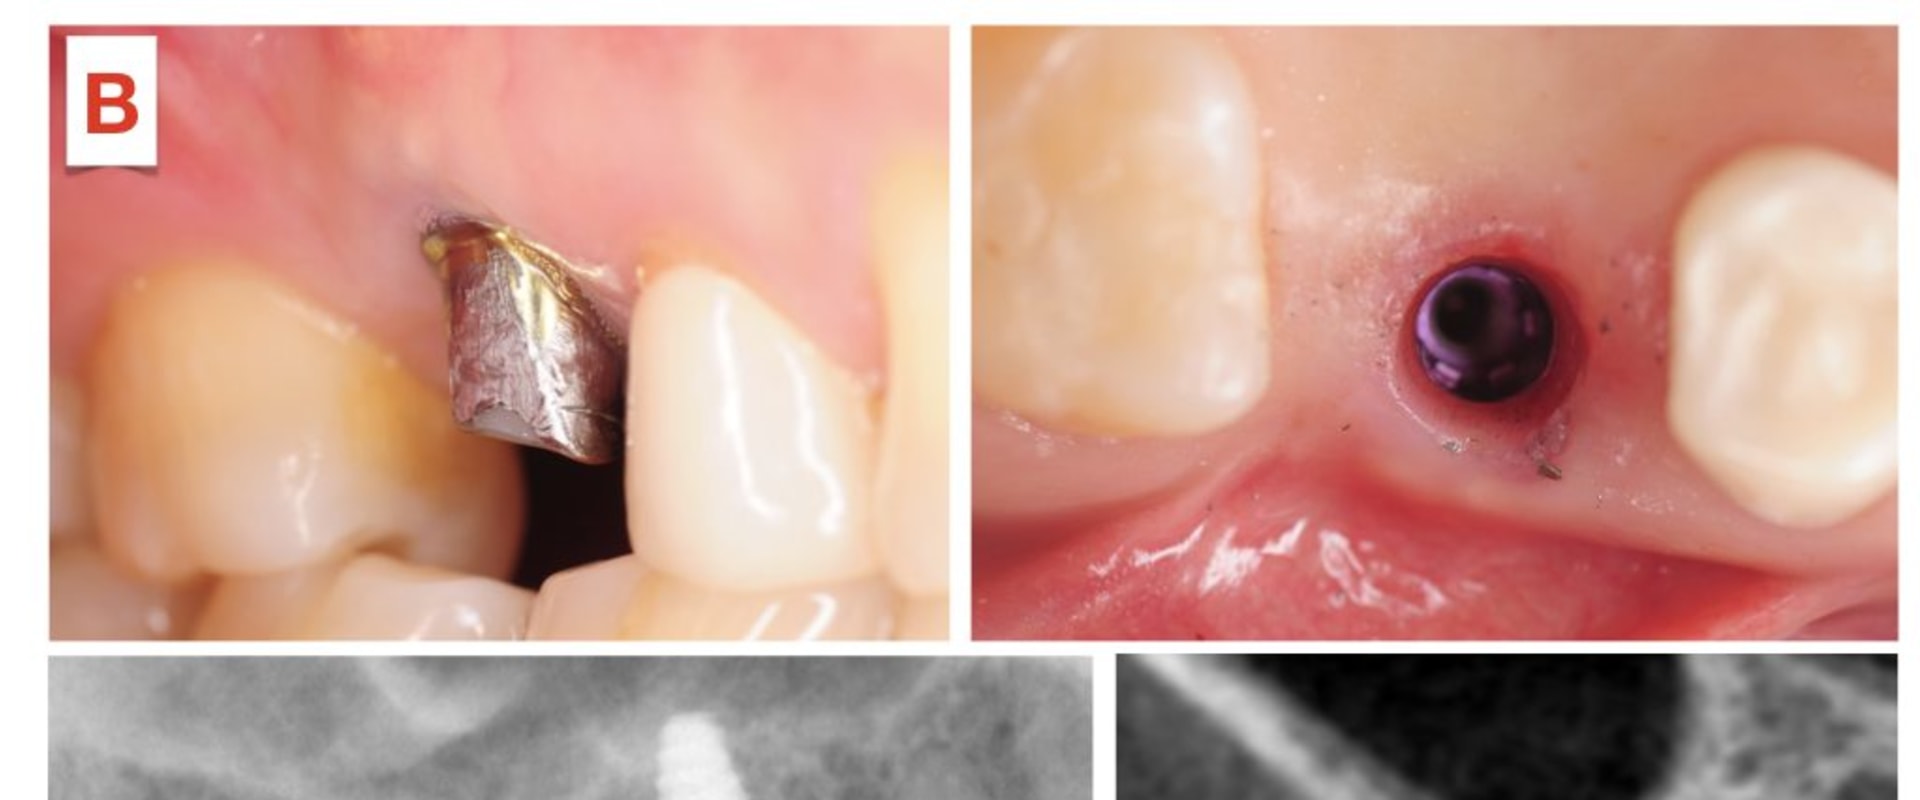 Why should a dental implant never be placed?